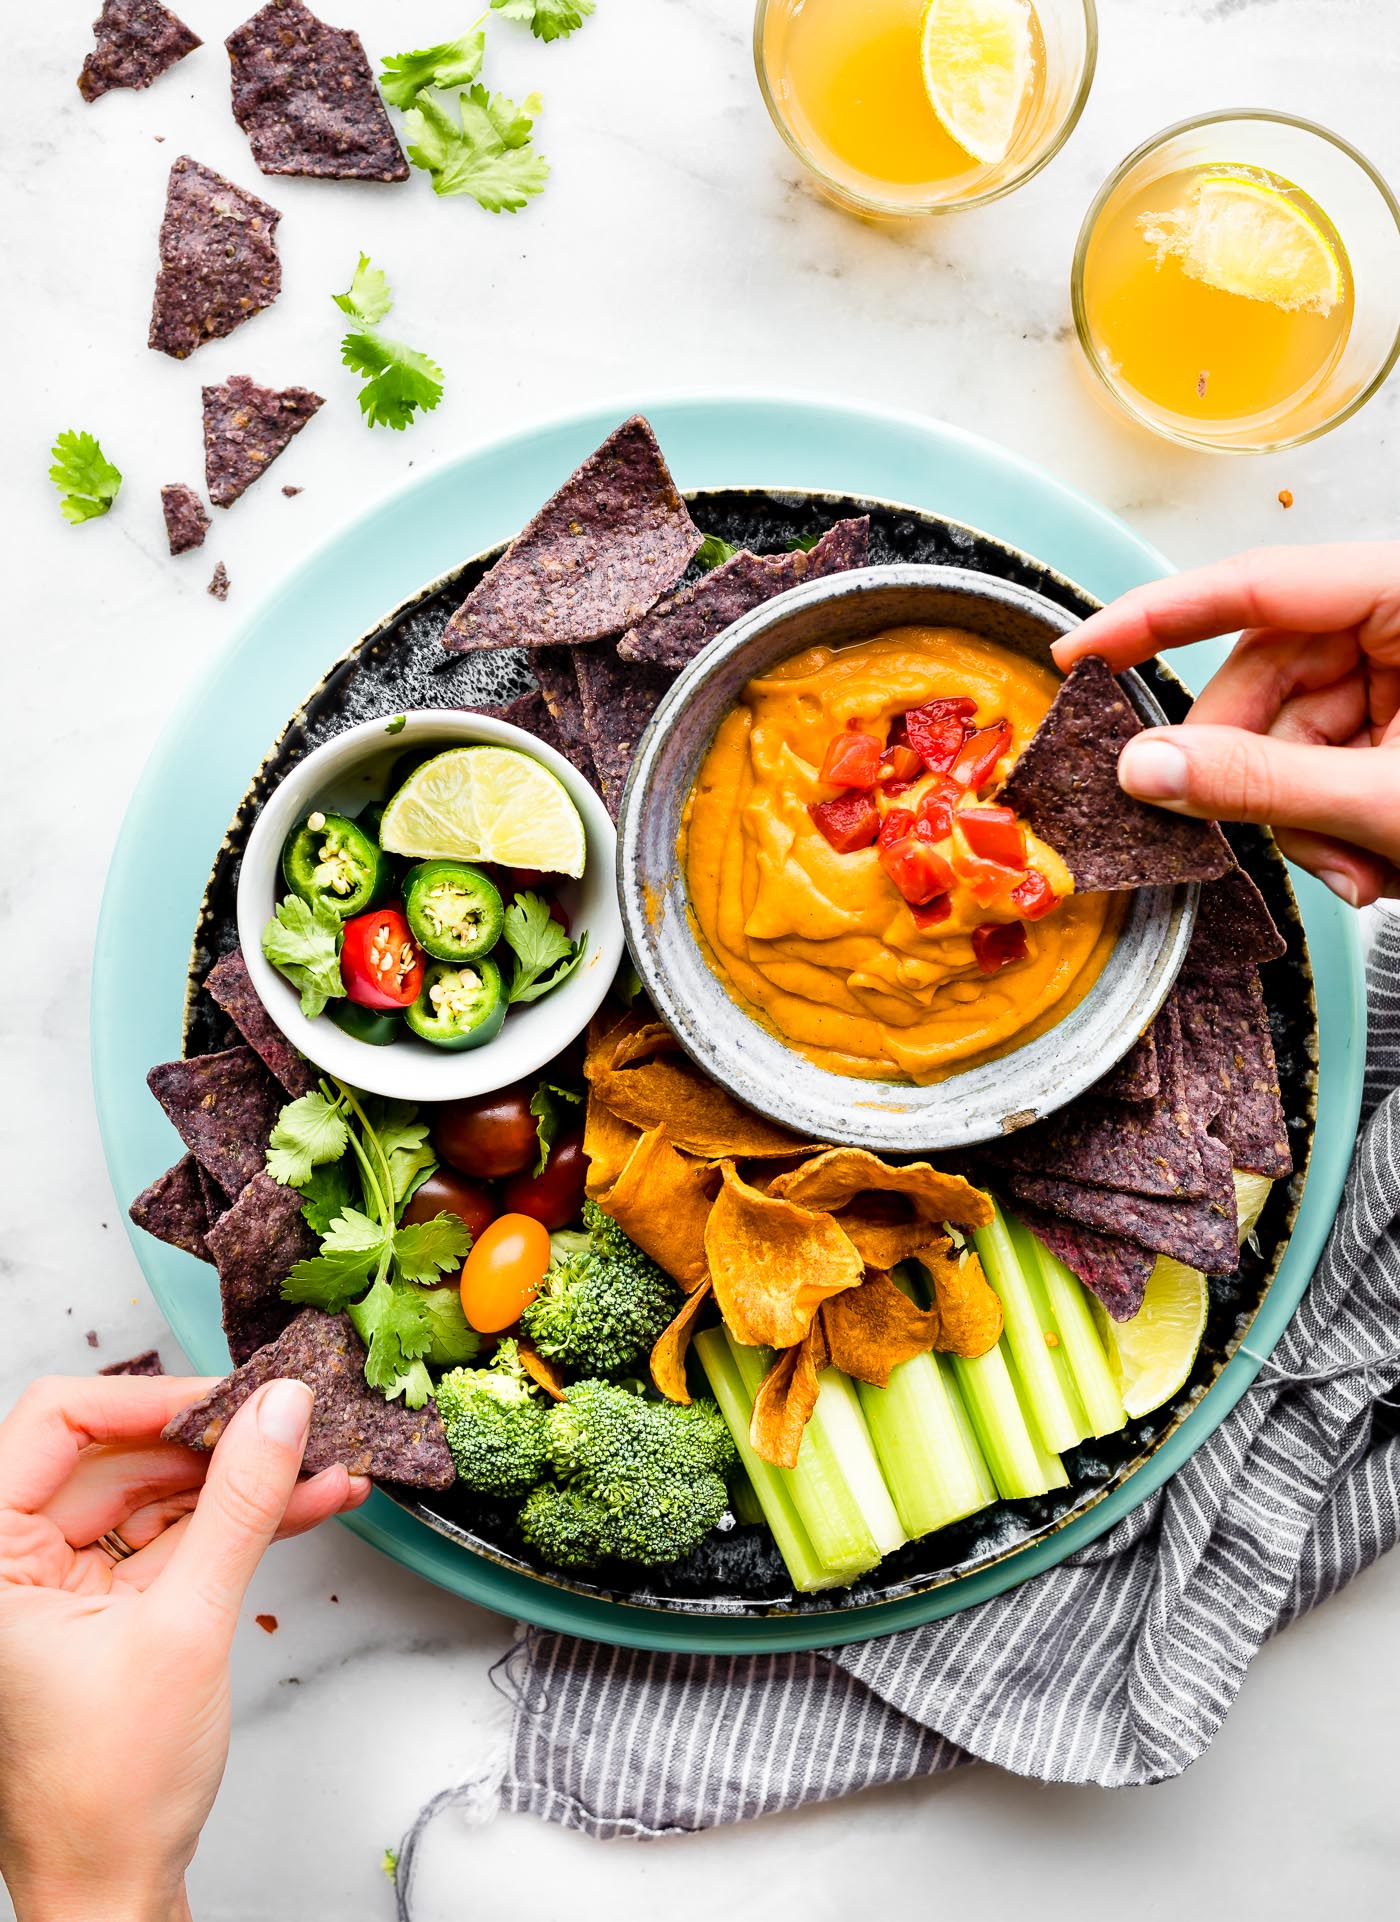 Vegan salsa con queso is an easy warm cheese dip recipe that will disappear as quickly as you make it! This vegan cheese dip is plant-based, using fresh vegetables and a hint of Tex-Mex spices, making it a family friendly dip that everyone will love.  Whole 30 friendly